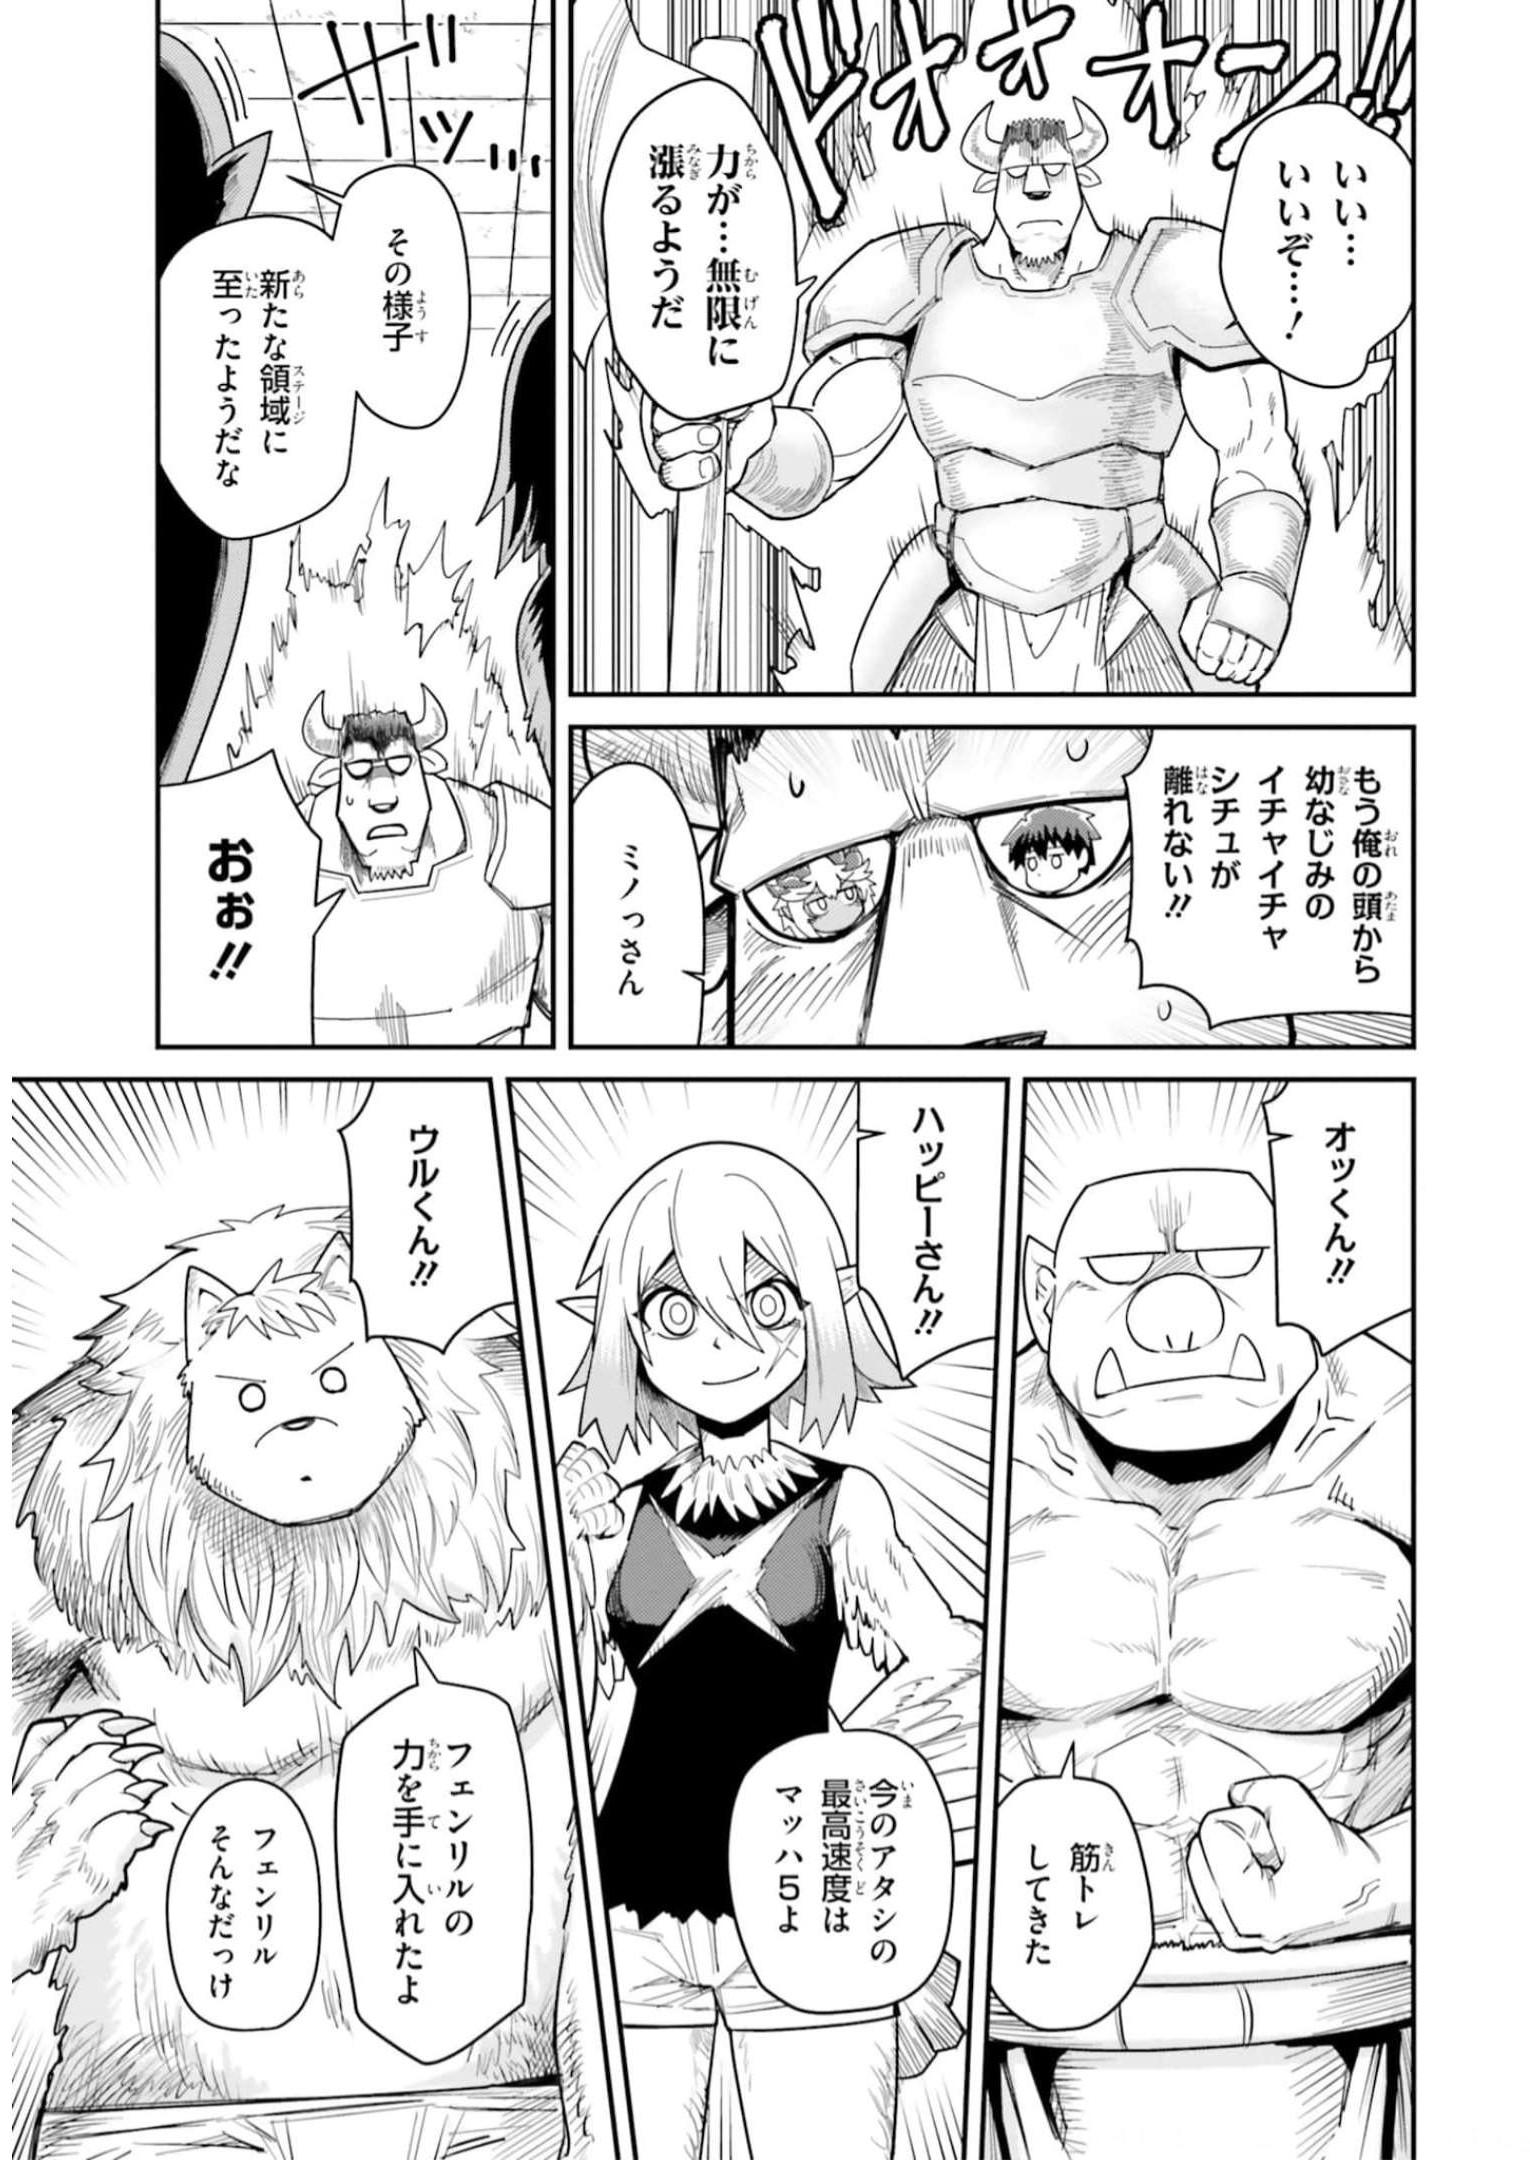 Dungeon Friends Forever Dungeon's Childhood Friend ダンジョンの幼なじみ 第11話 - Page 11